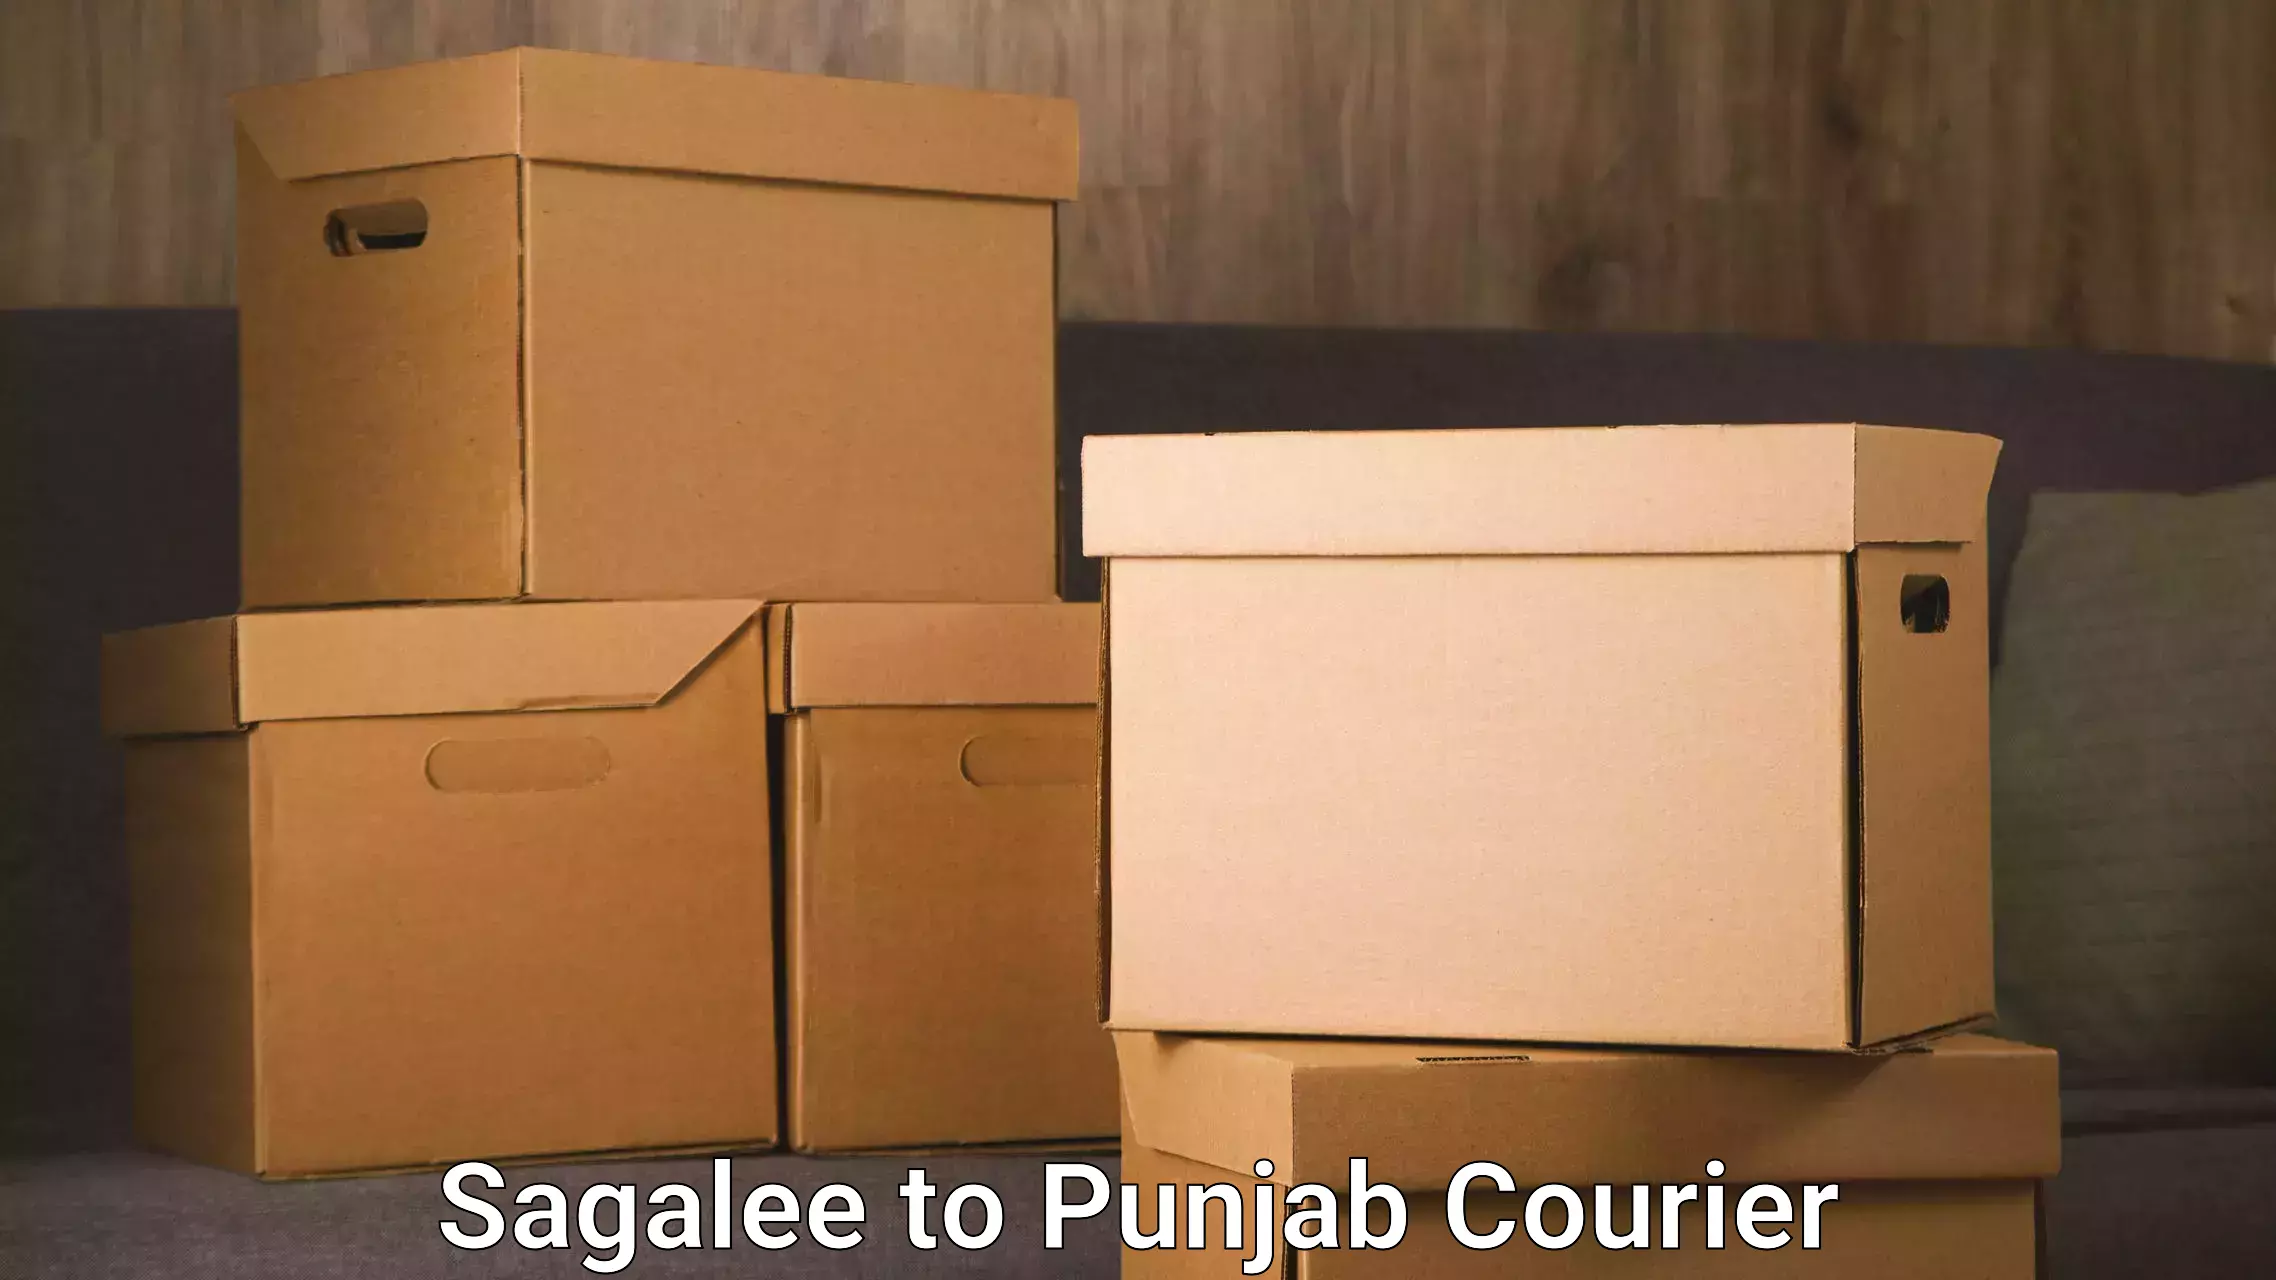 Flexible delivery schedules Sagalee to Punjab